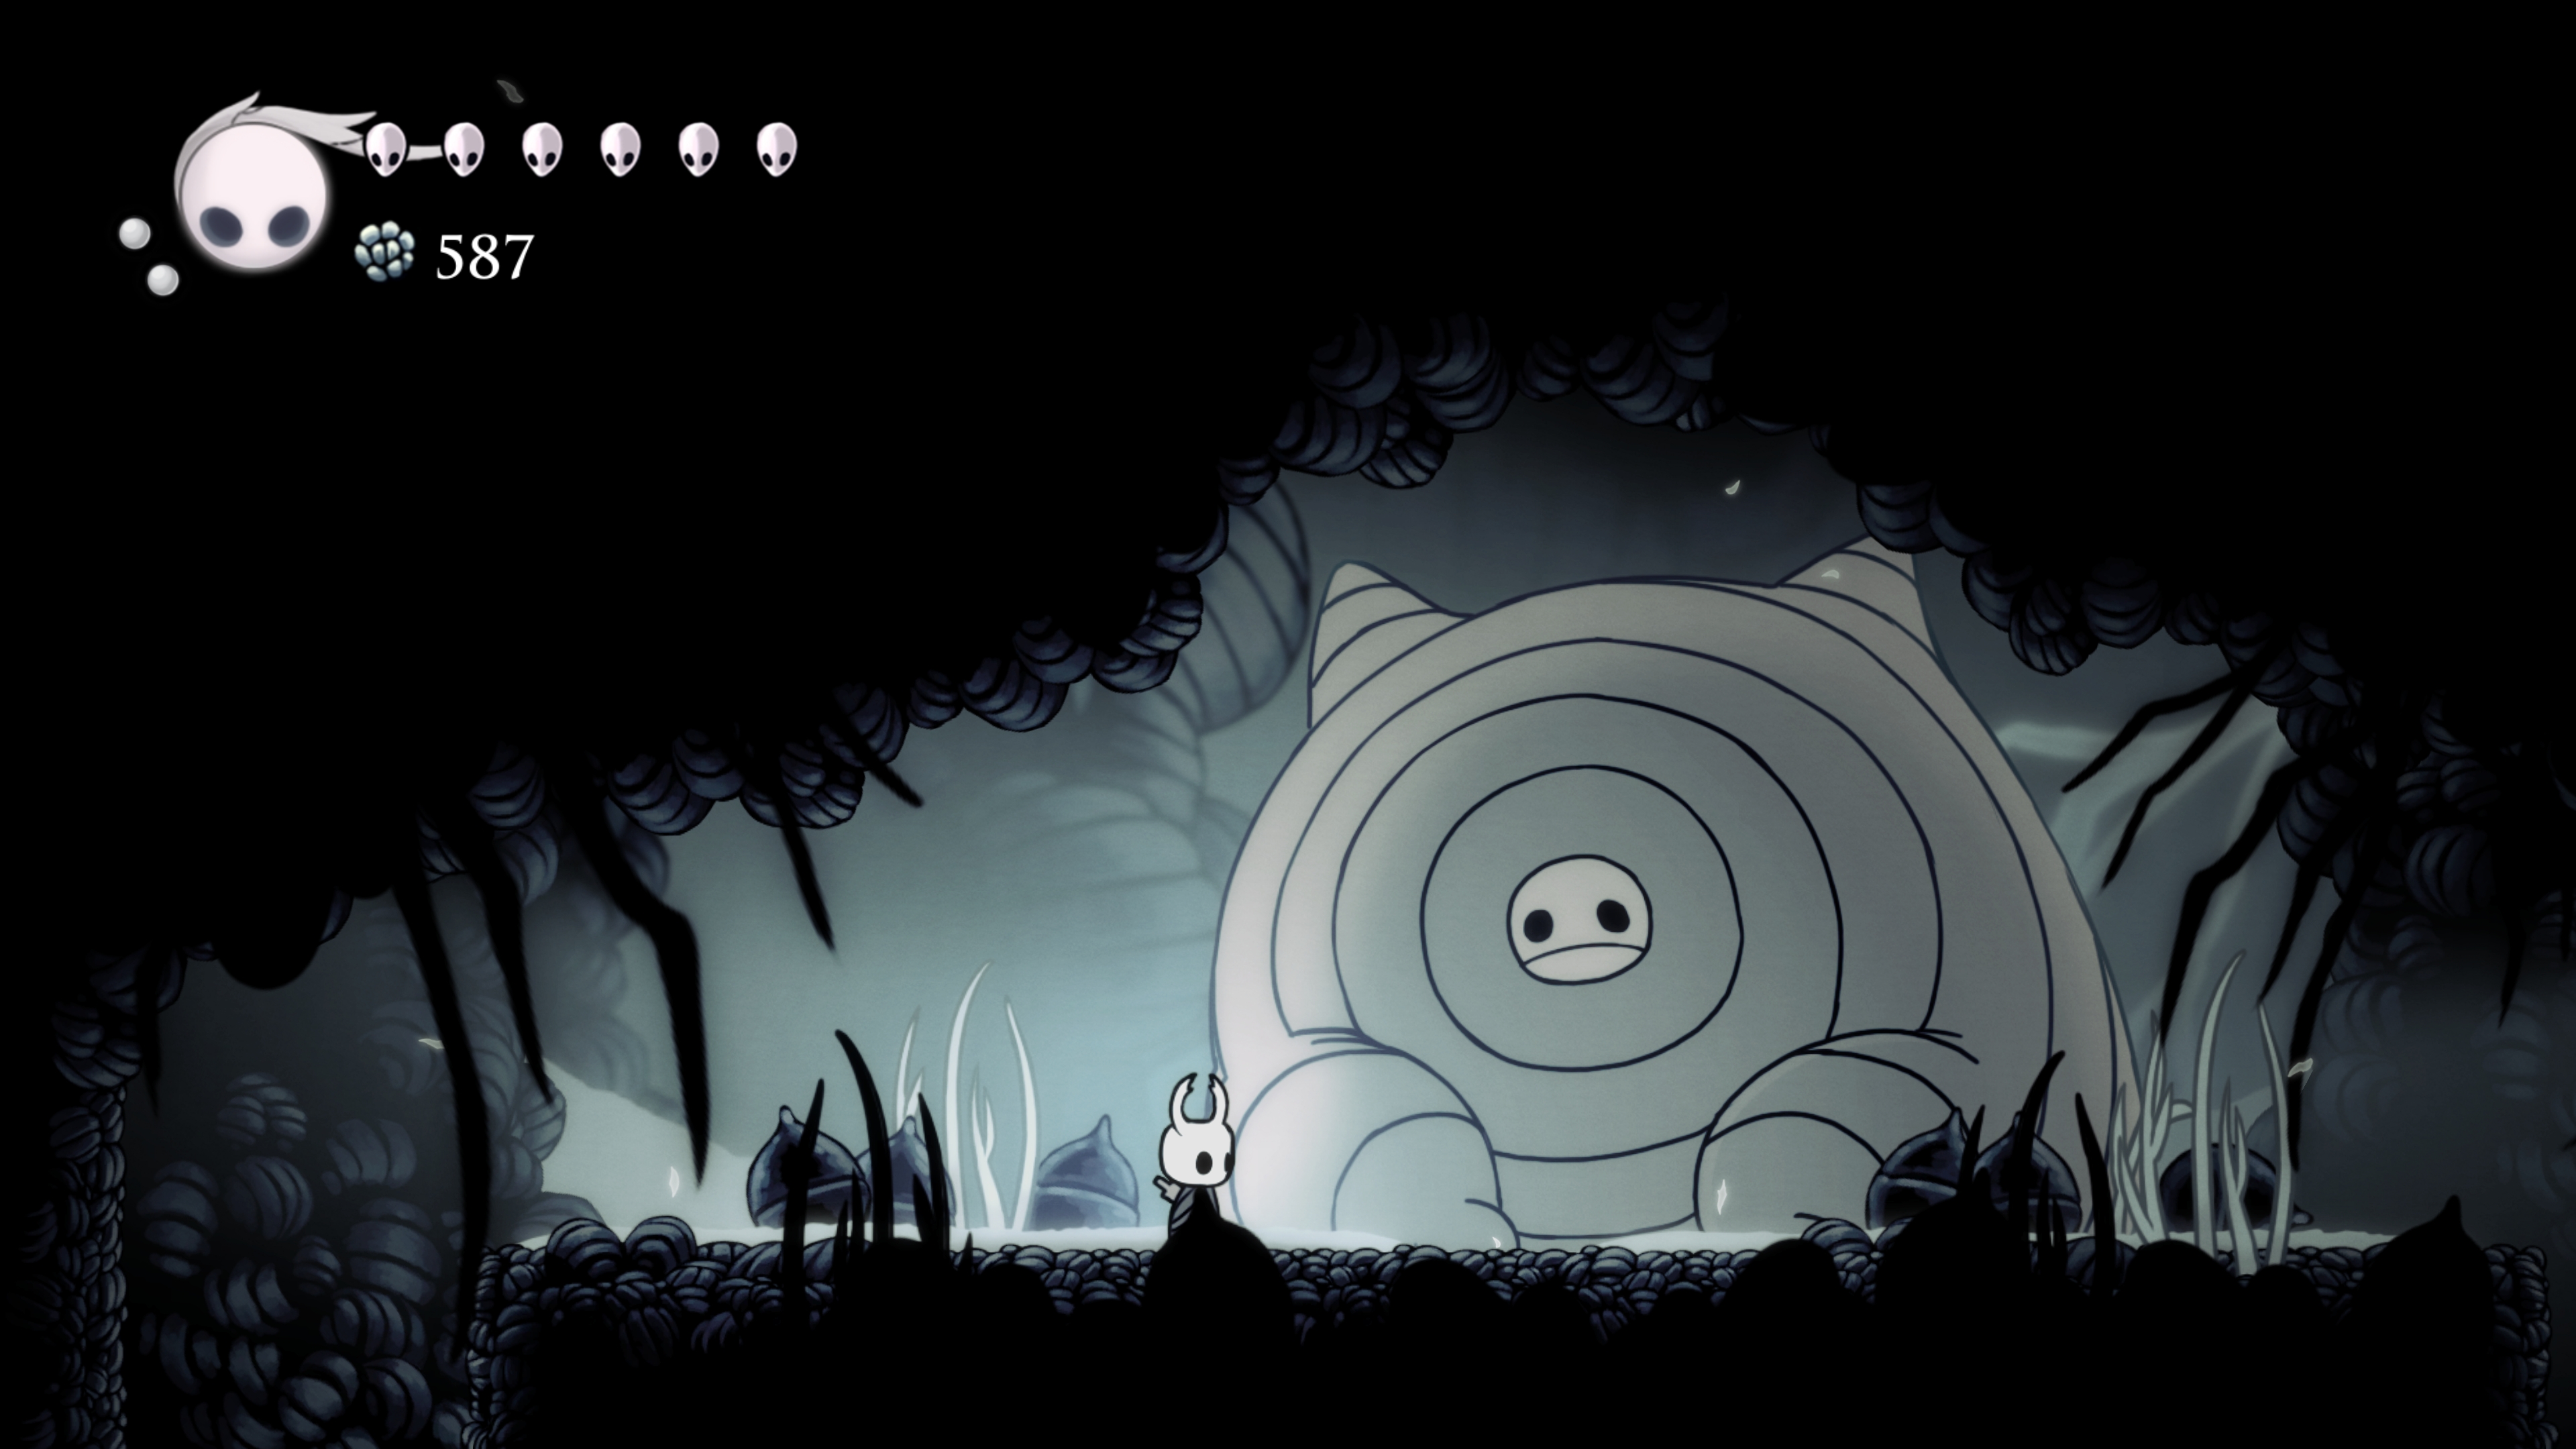 Hollow Knight Desktop Wallpaper Discover more Action, Adventure, Developed,  Game, Hollow Knight wallpaper. https://www.enwallpaper.com/h… | Knight,  Wallpaper, Anime